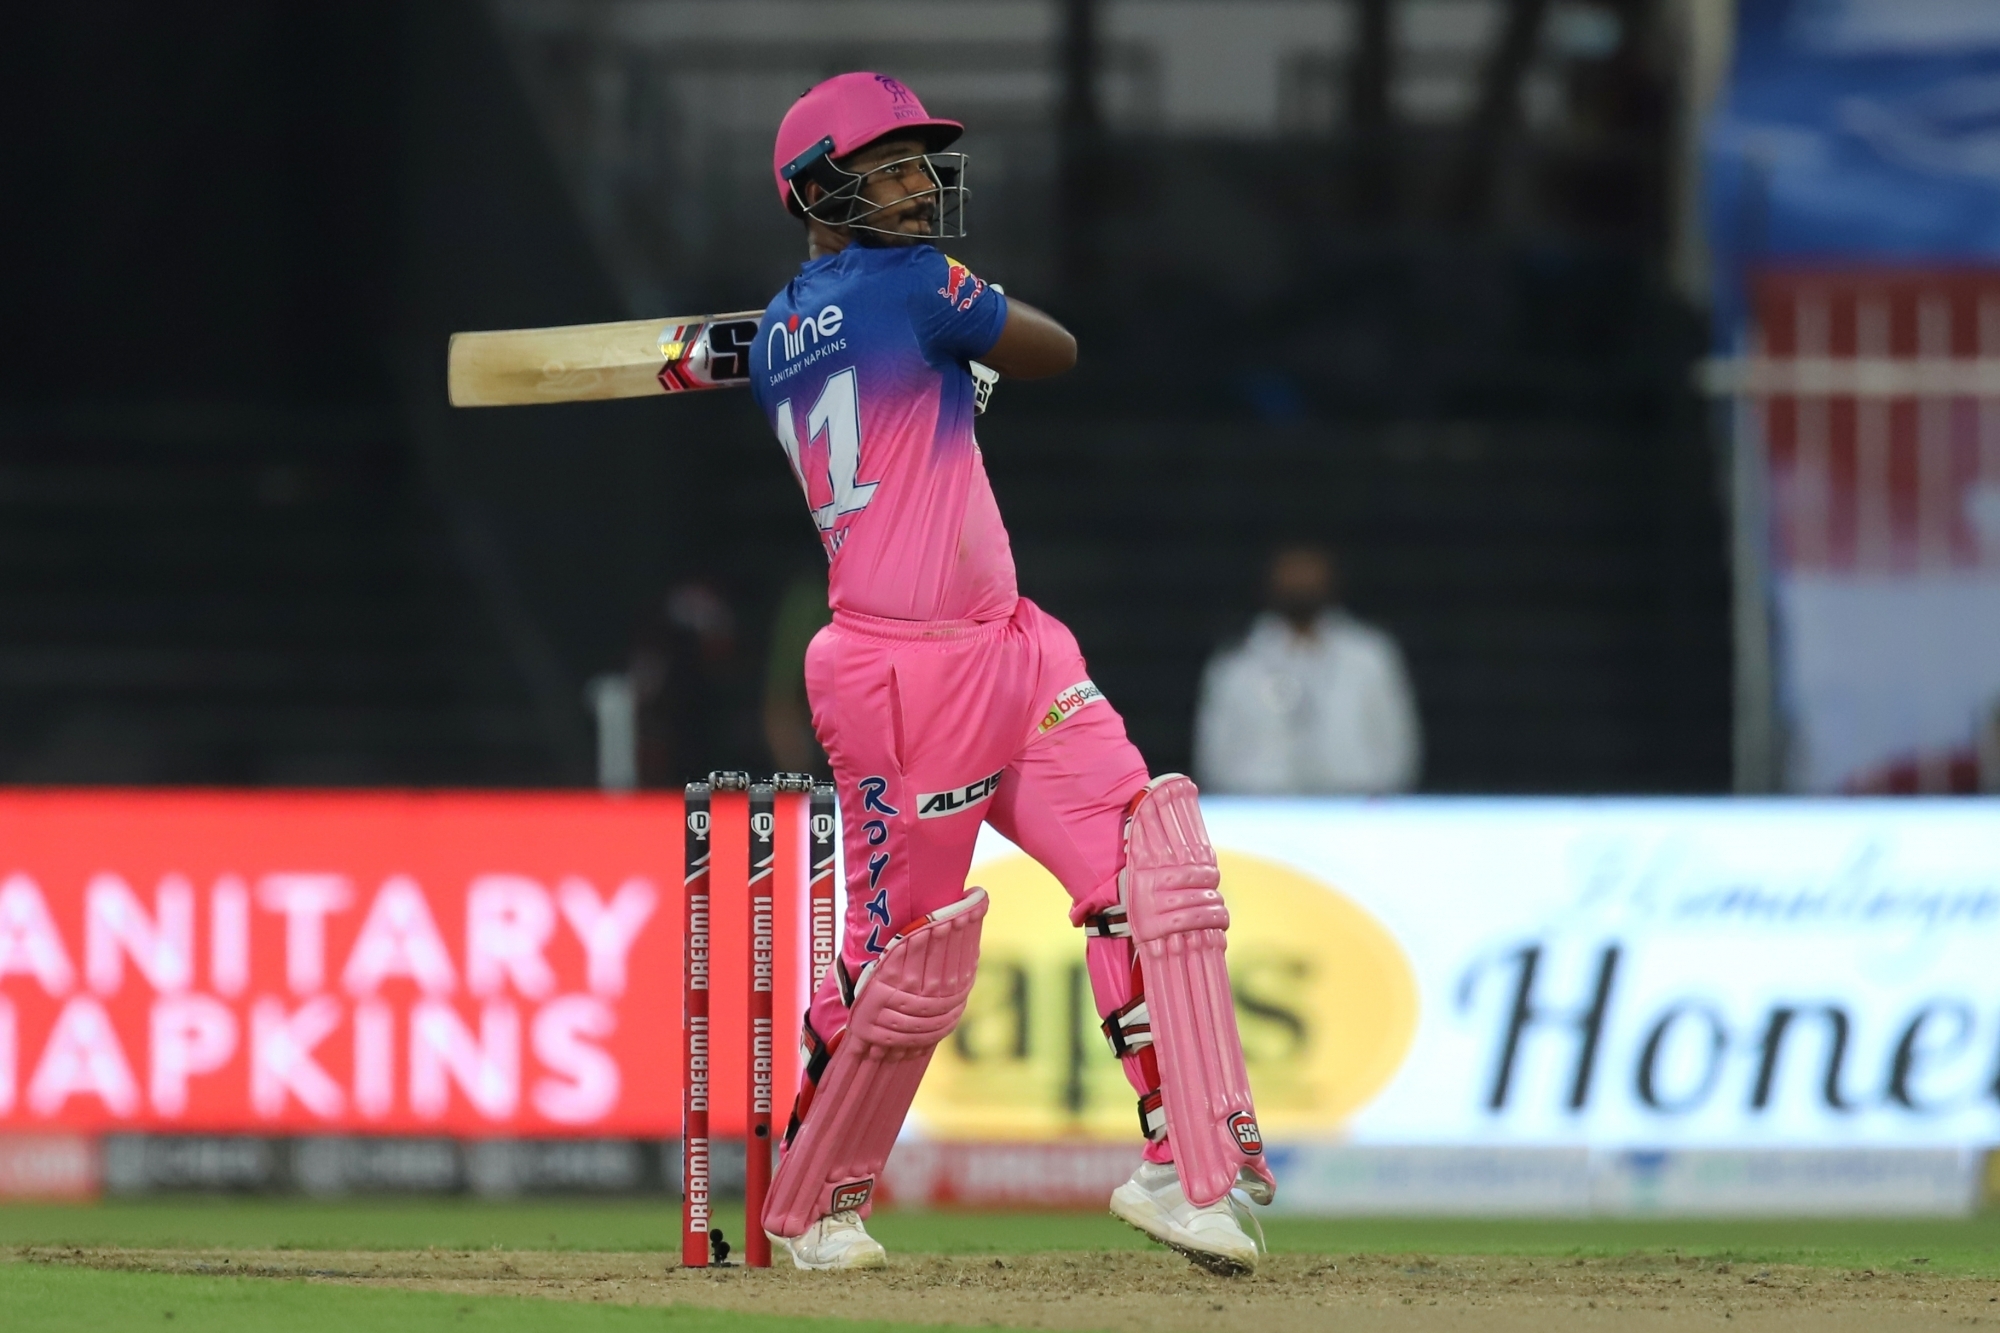 Sanju Samson has flopped after a couple of good innings at the start of IPL 2020 | BCCI/IPL